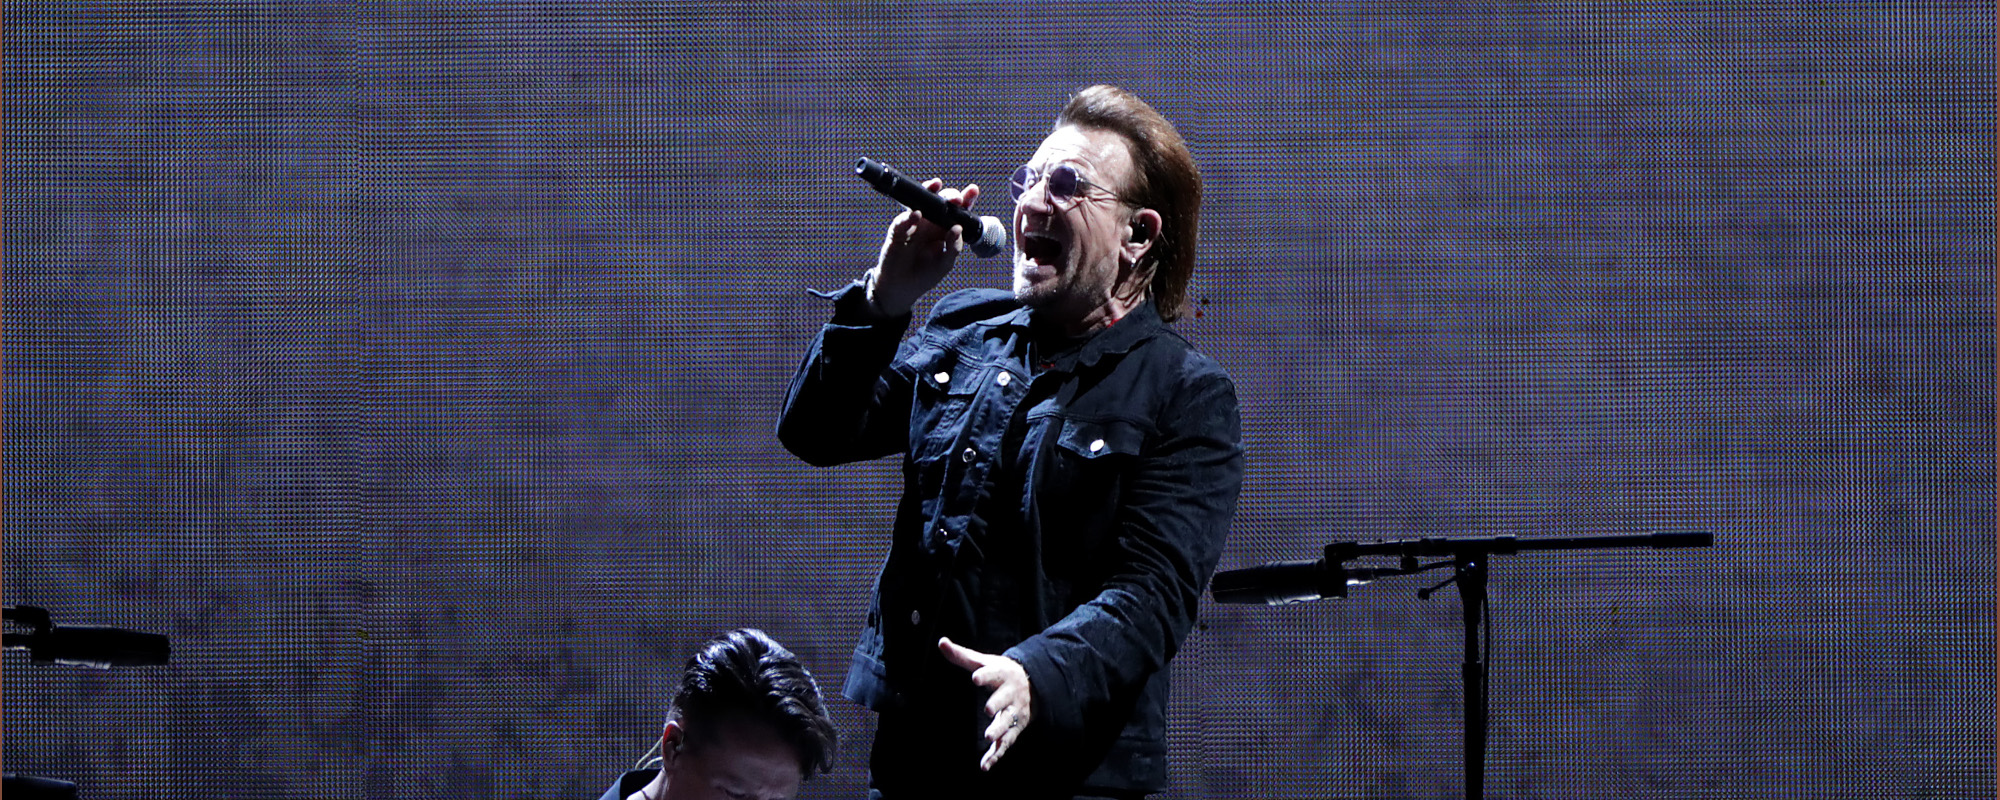 U2 Premieres New Song “Atomic City” with Larry Mullen Jr. During Surprise Video Shoot